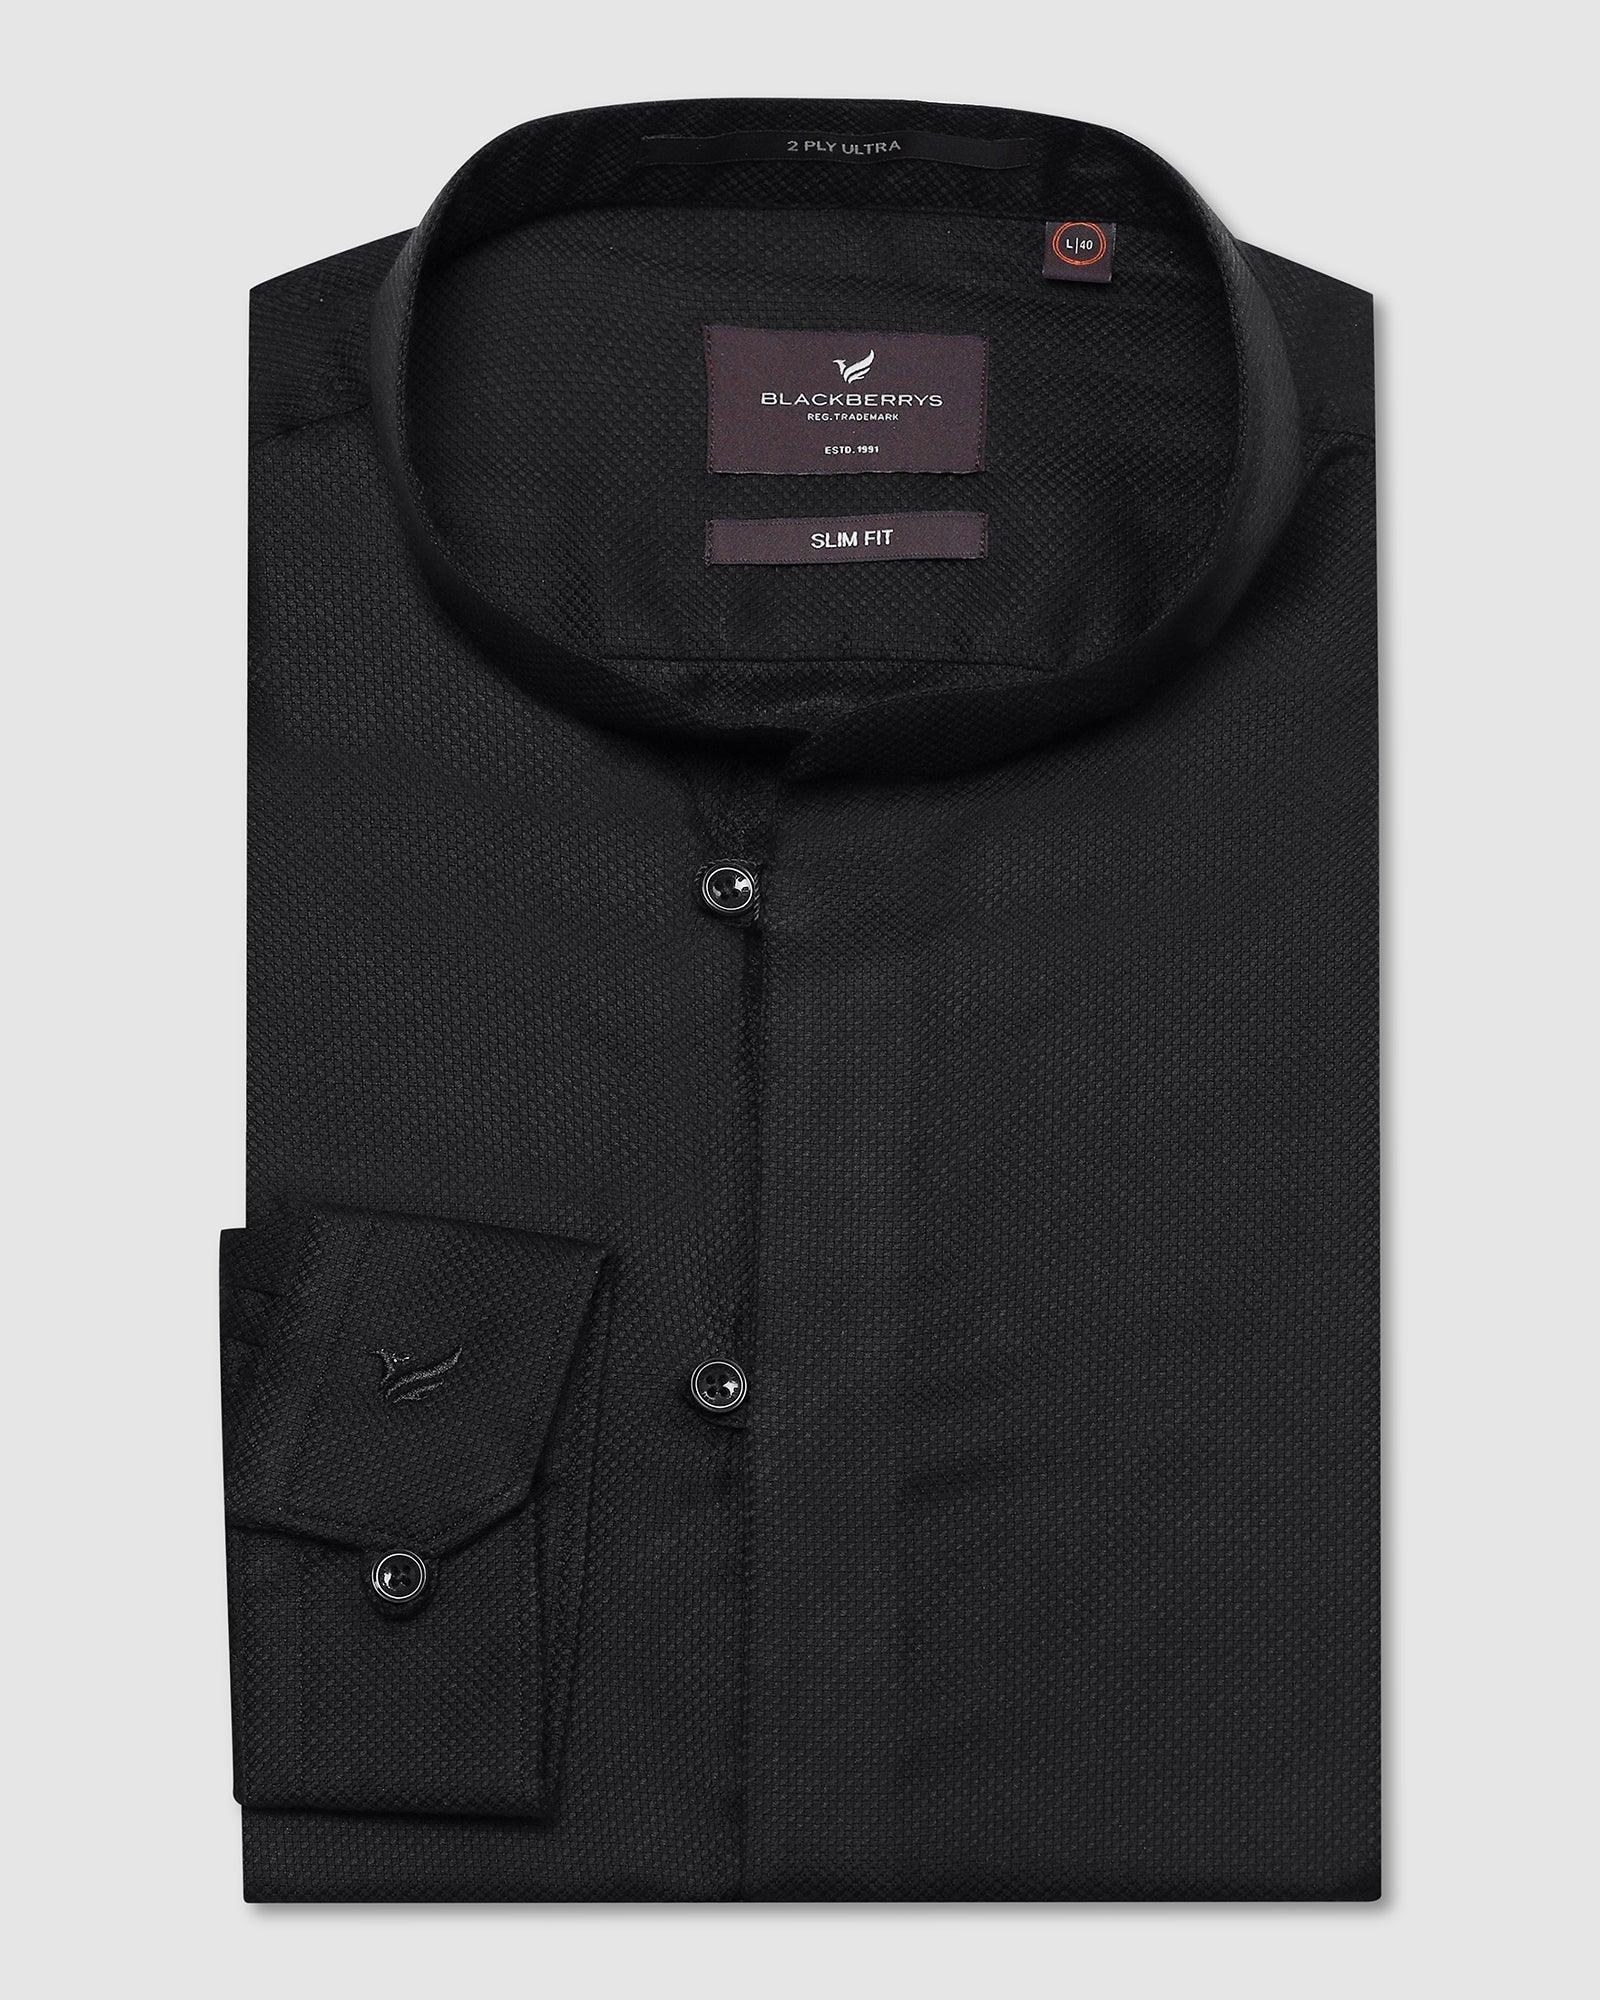 Formal Black Textured Shirt - Trout